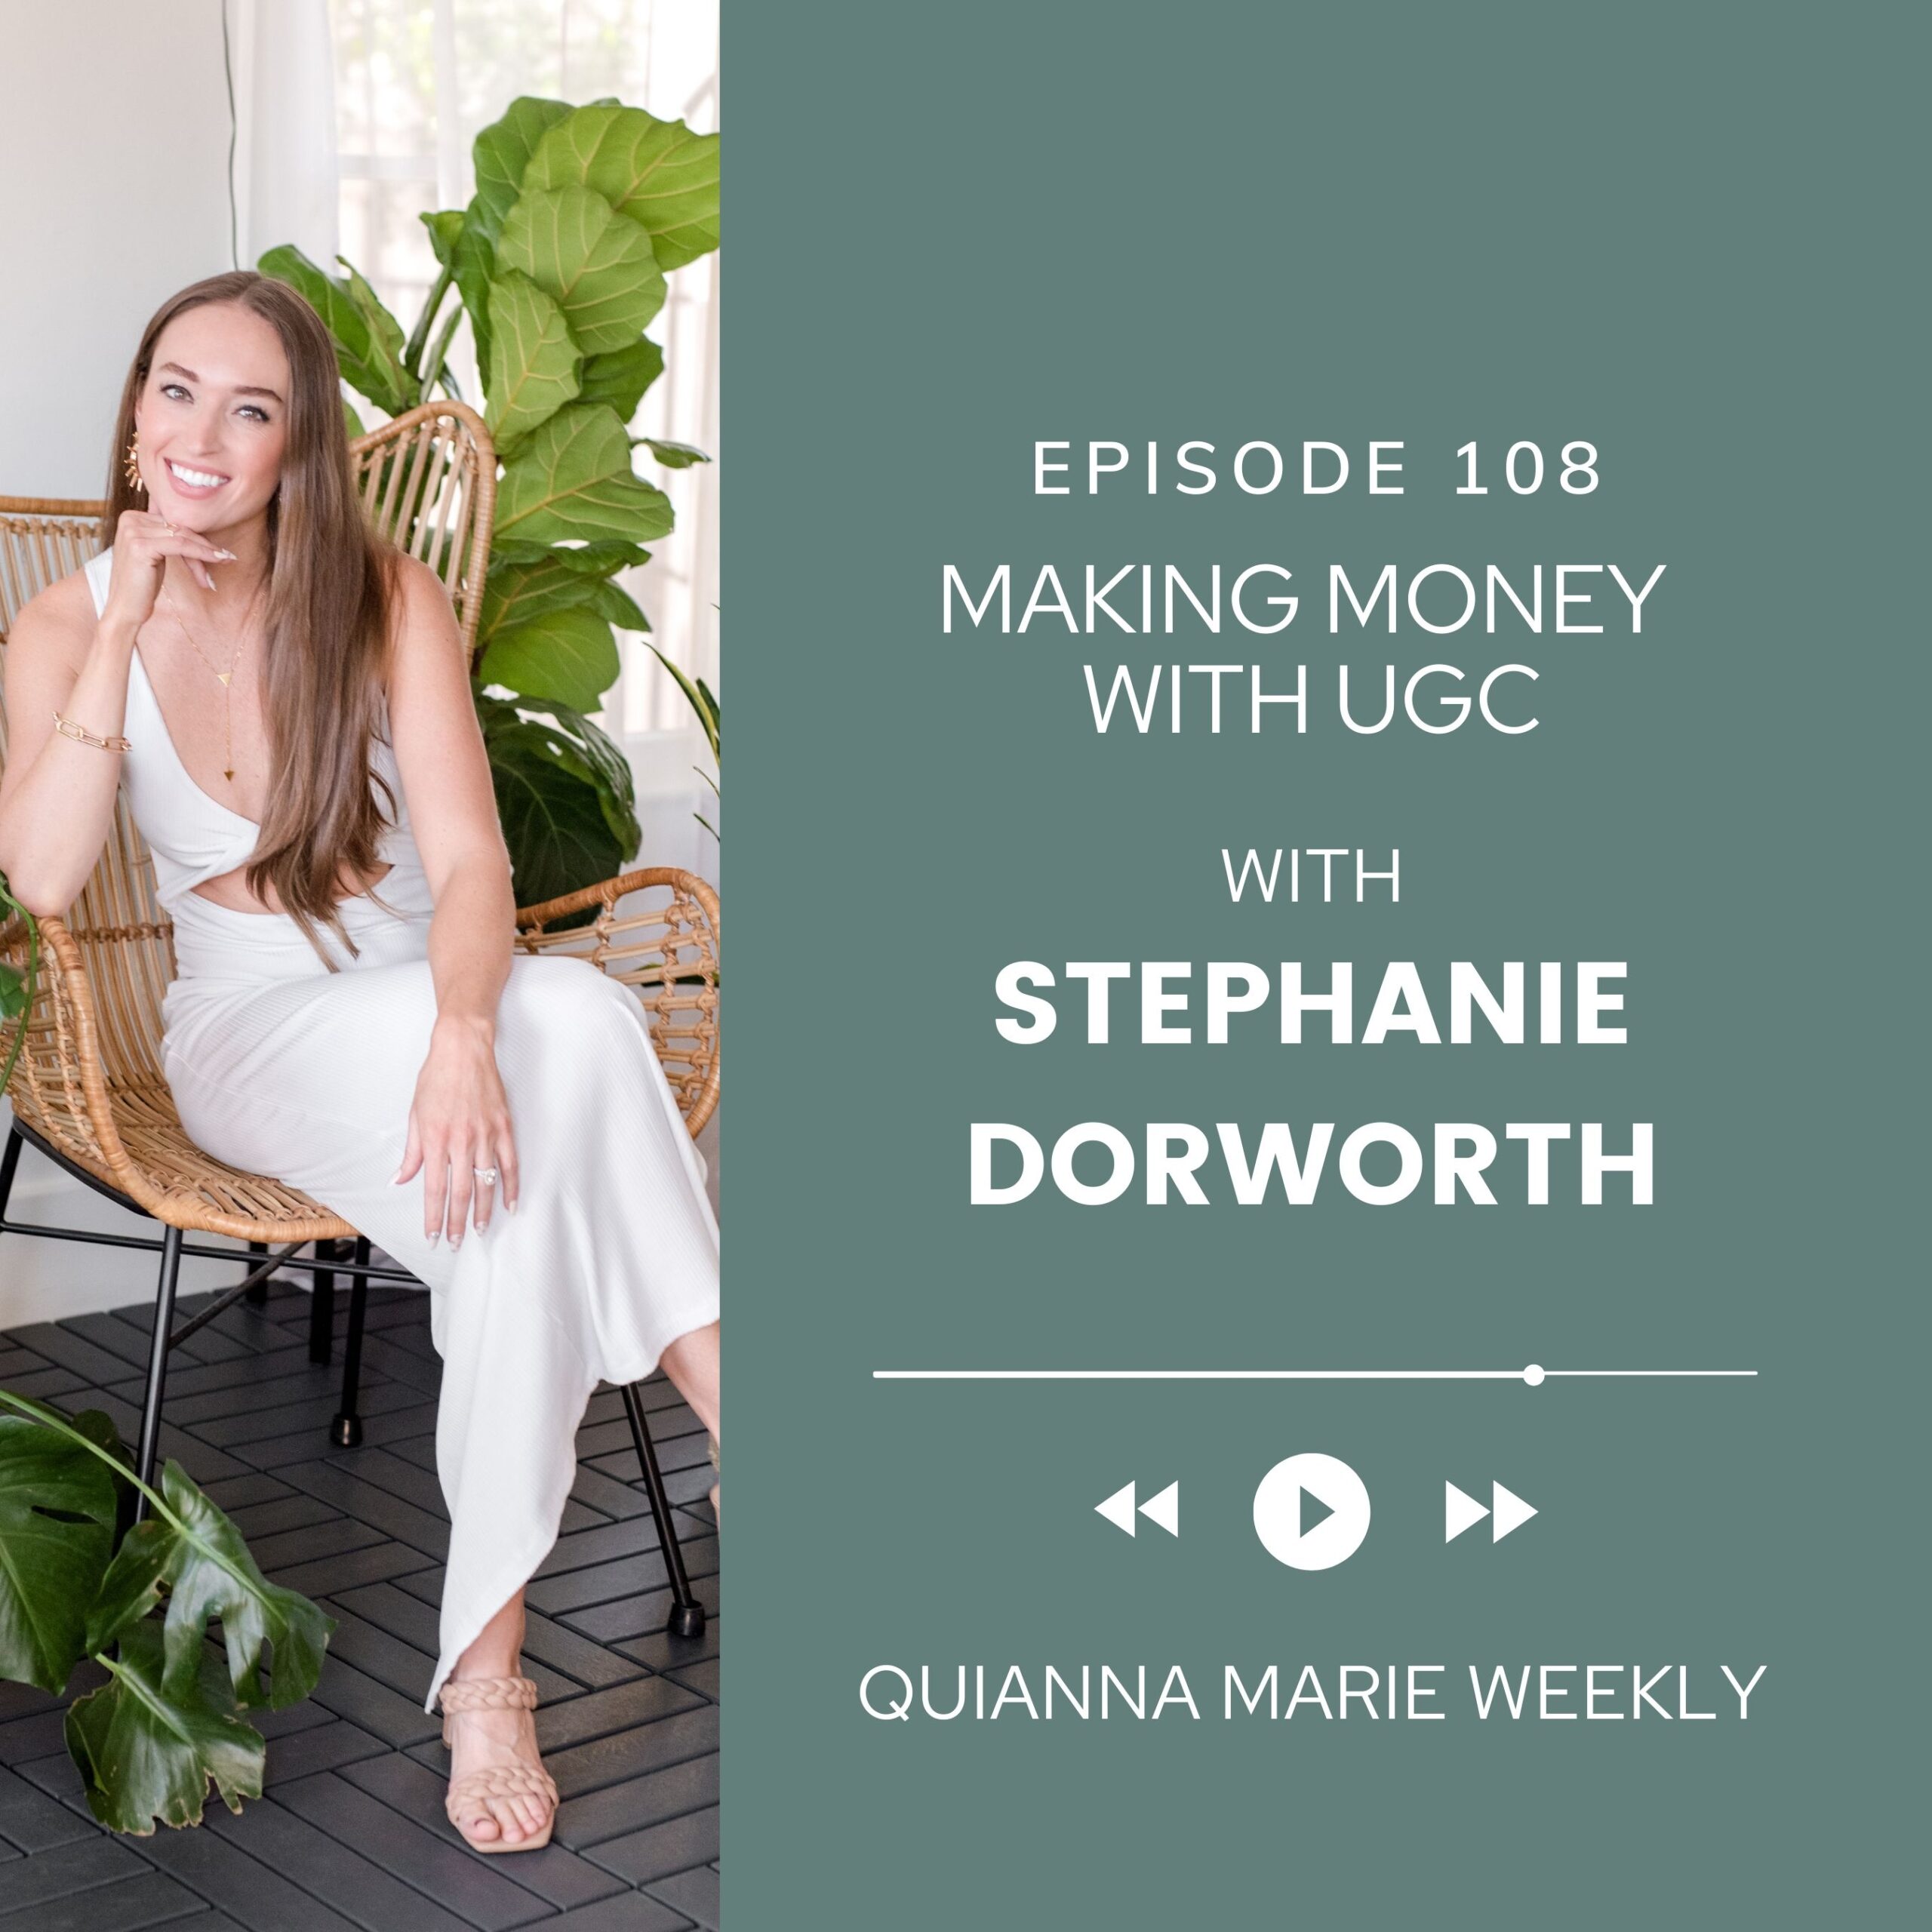 Making Money Online with UGC Featuring Stephanie Dorworth on Quianna Marie Weekly